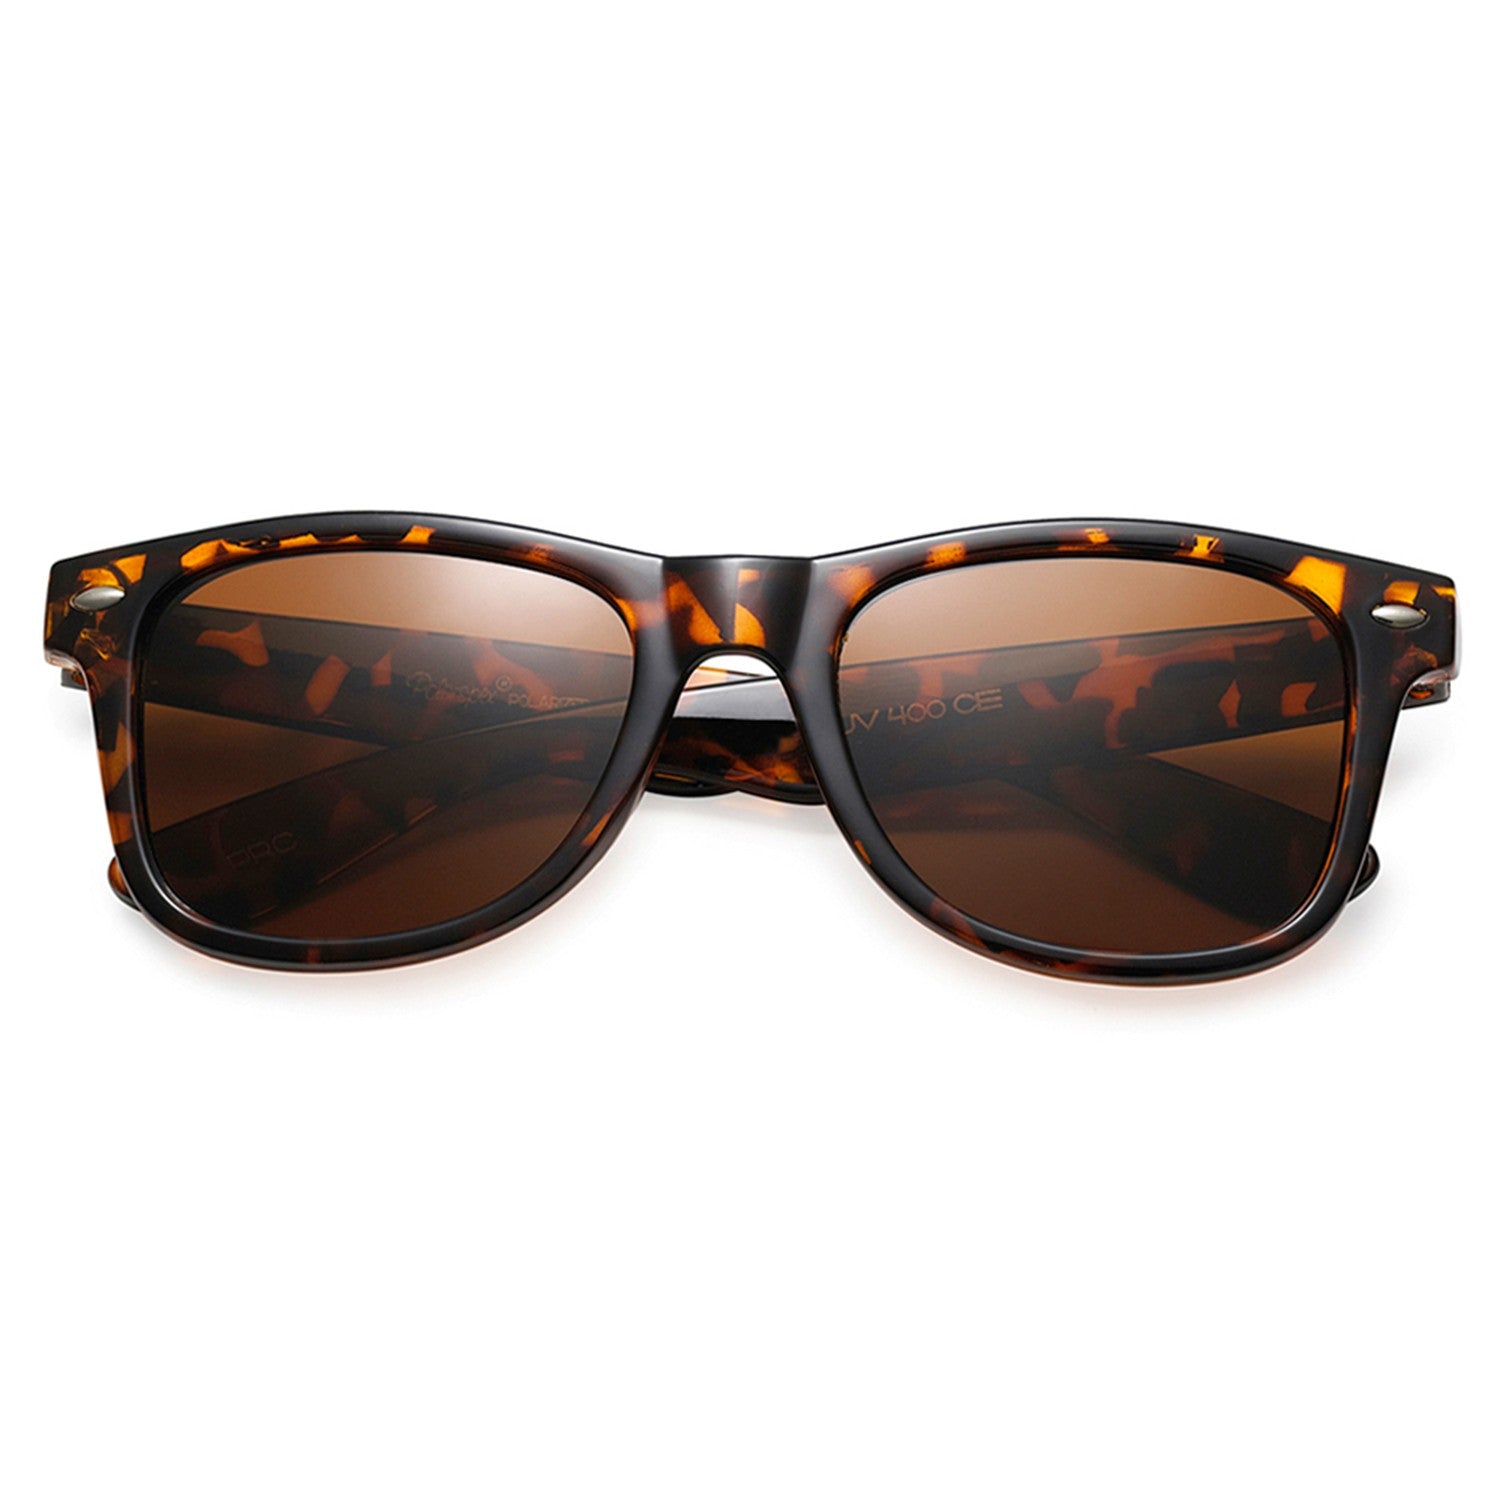 Polarspex Polarized 80's Retro Style Kids Sunglasses with Honey Tortoise Frames and Polarized Brown Lenses for Boys and Girls